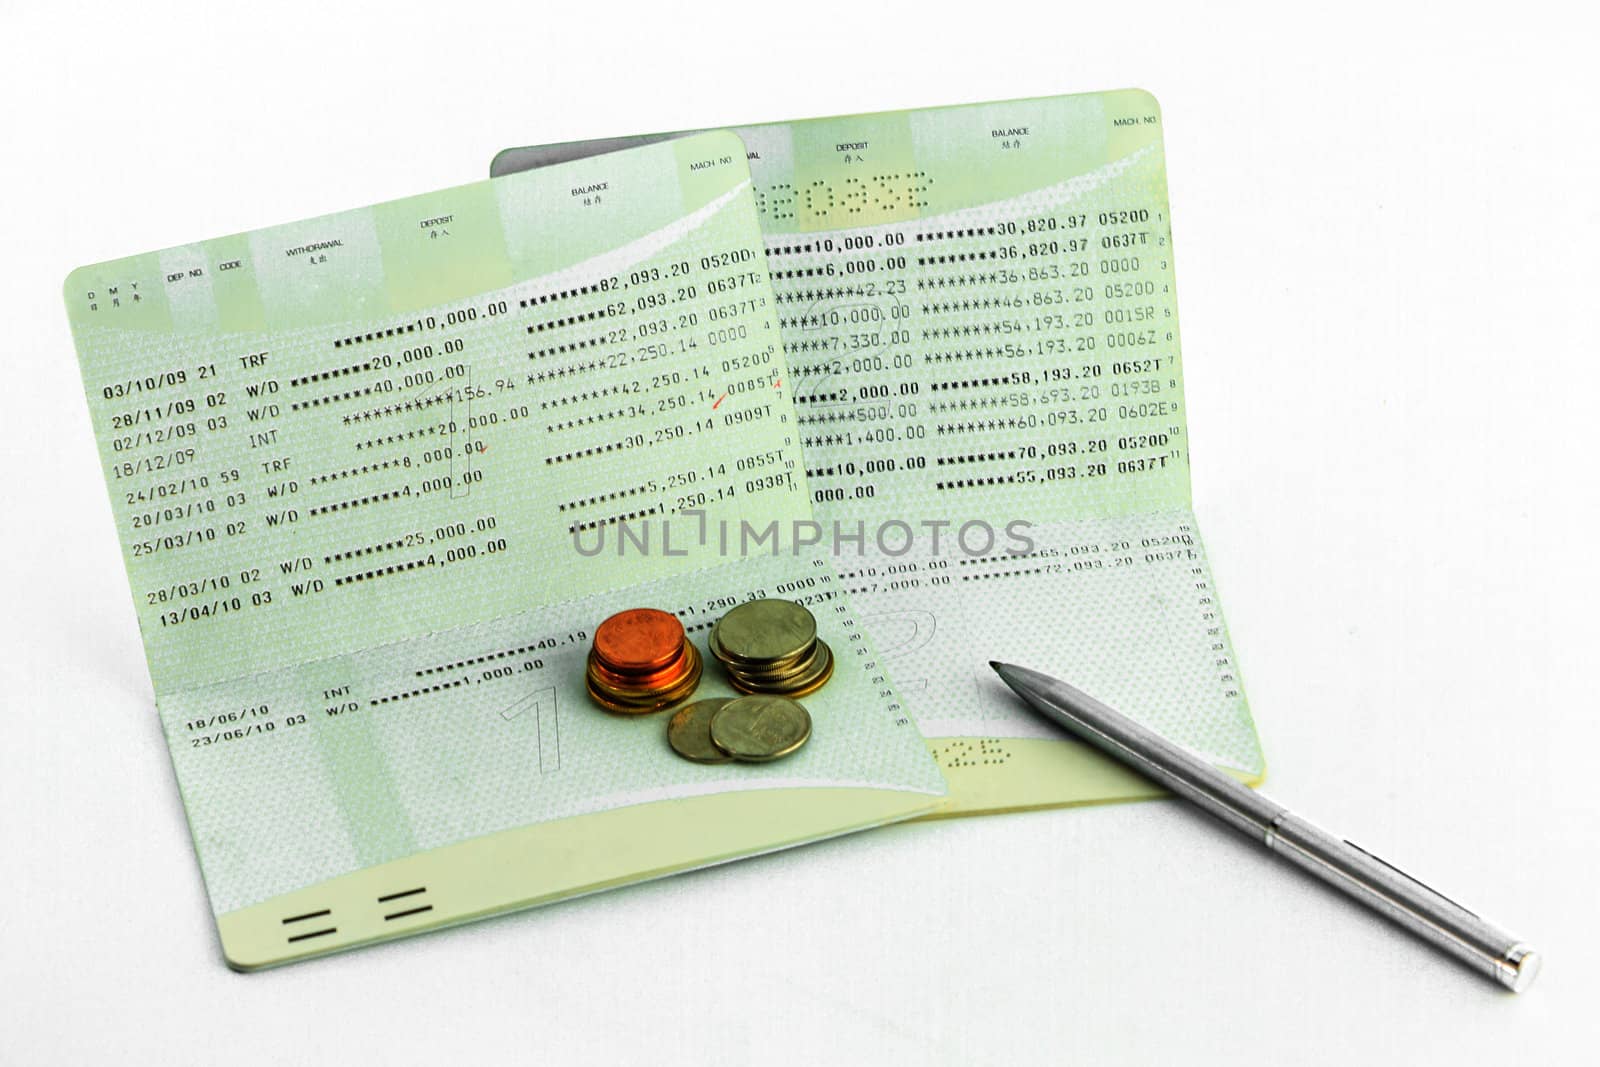 Coins on account passbook with pen isolate on white background